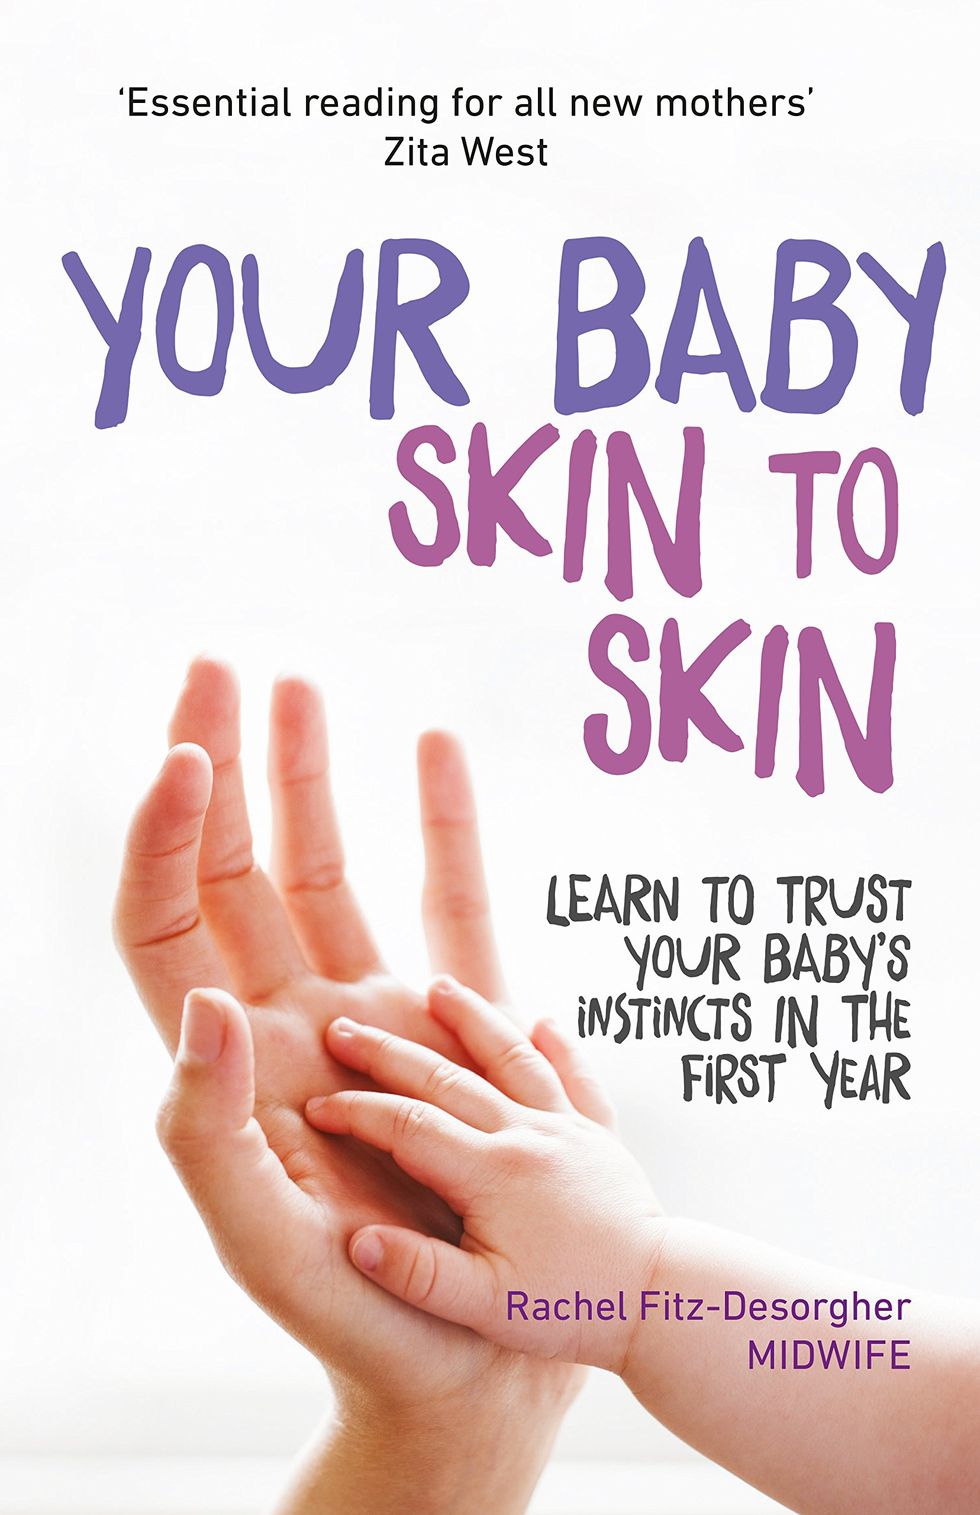 Your Baby Skin to Skin: Learn to trust your baby's instincts in the first year